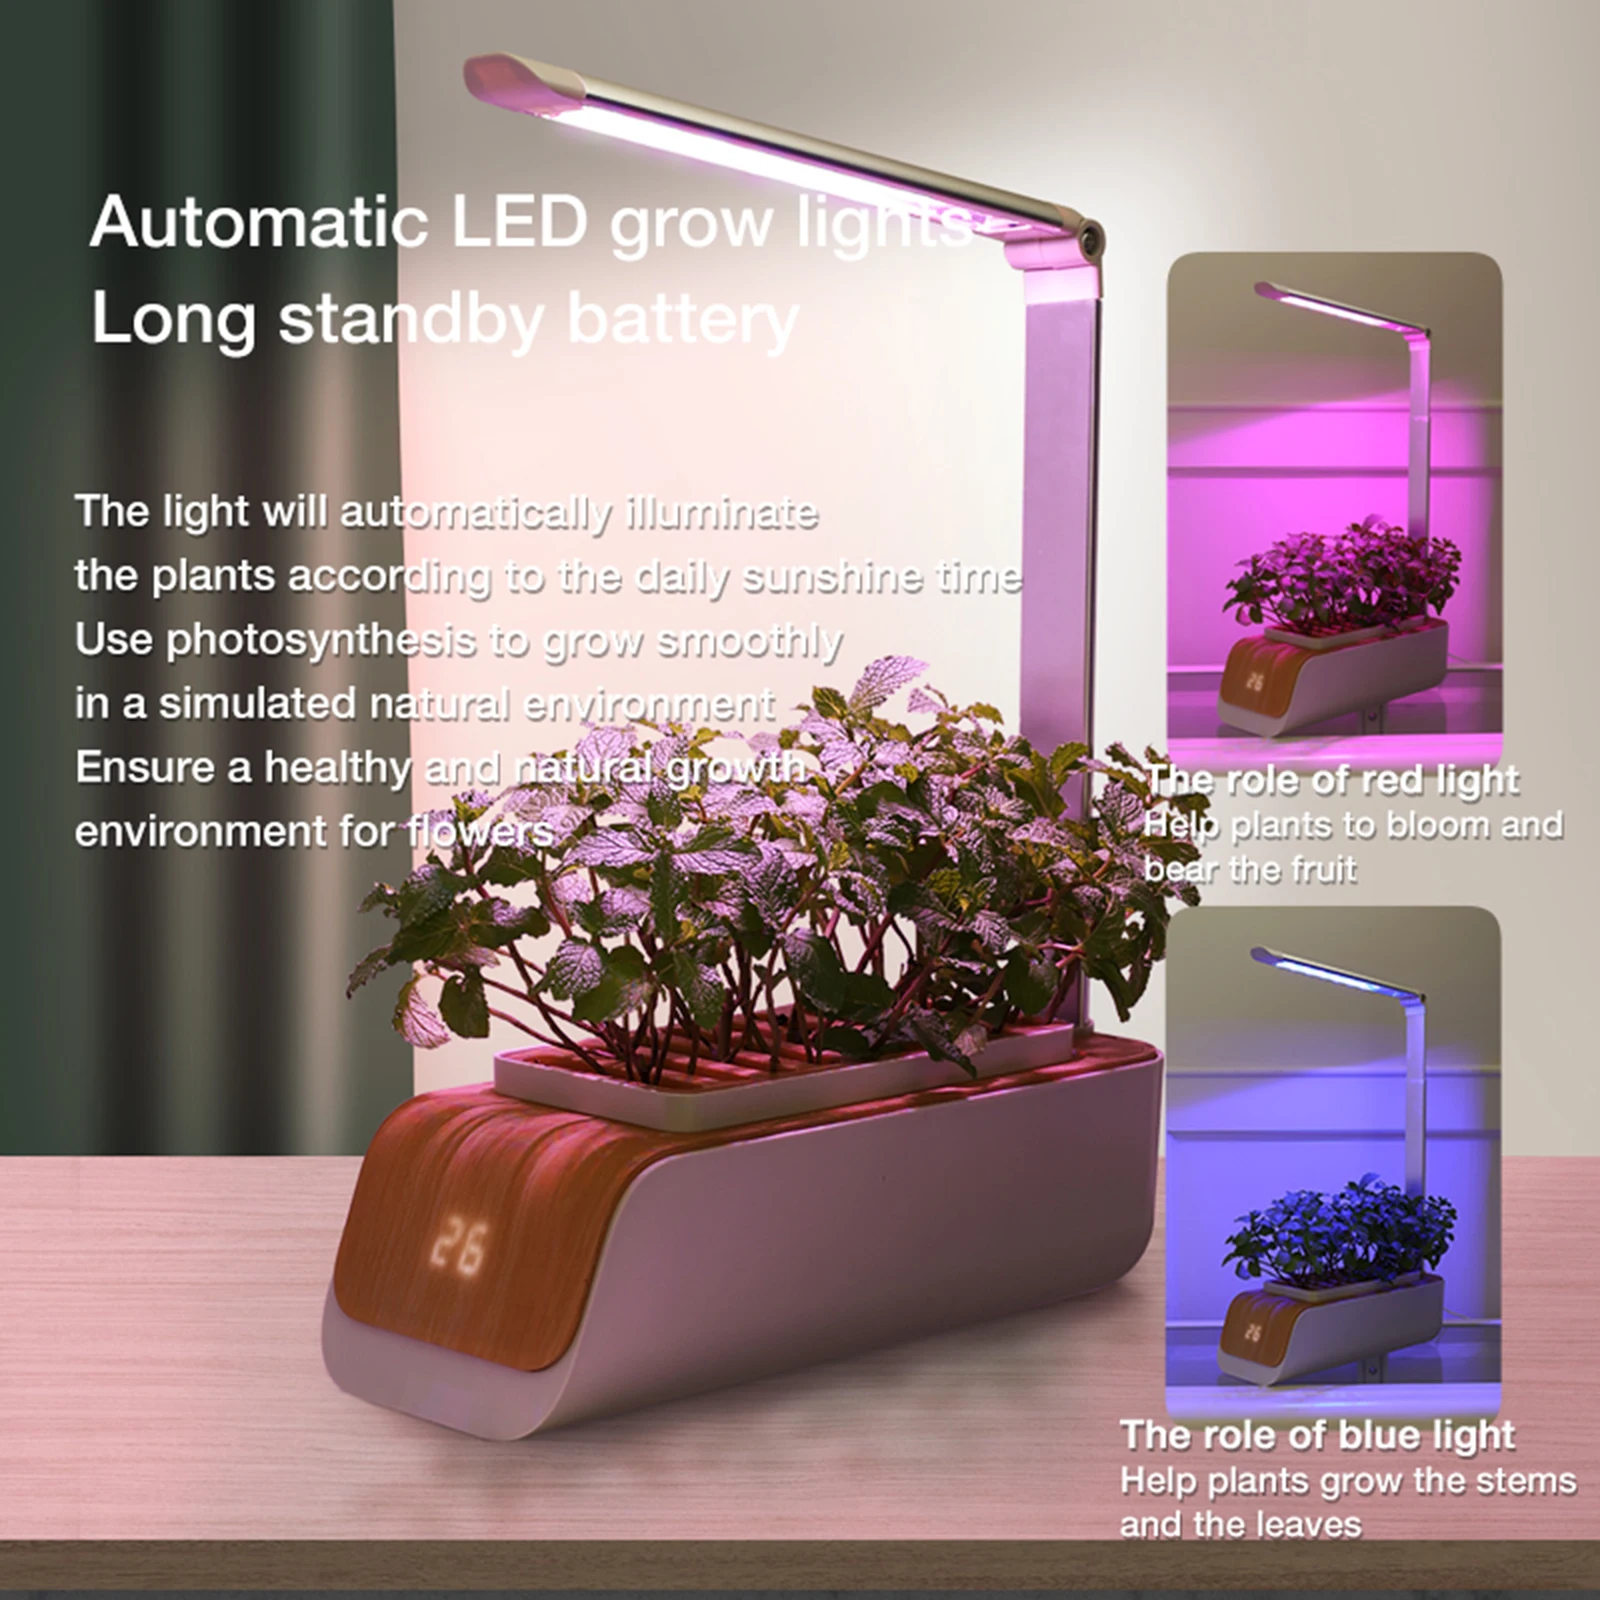 Smart Hydroponic Garden Indoor Herb Gardens Starter Kit Planter LED Grow Light Kit Hydroponic Growing System Grow Light Box Grower Lamps Trend